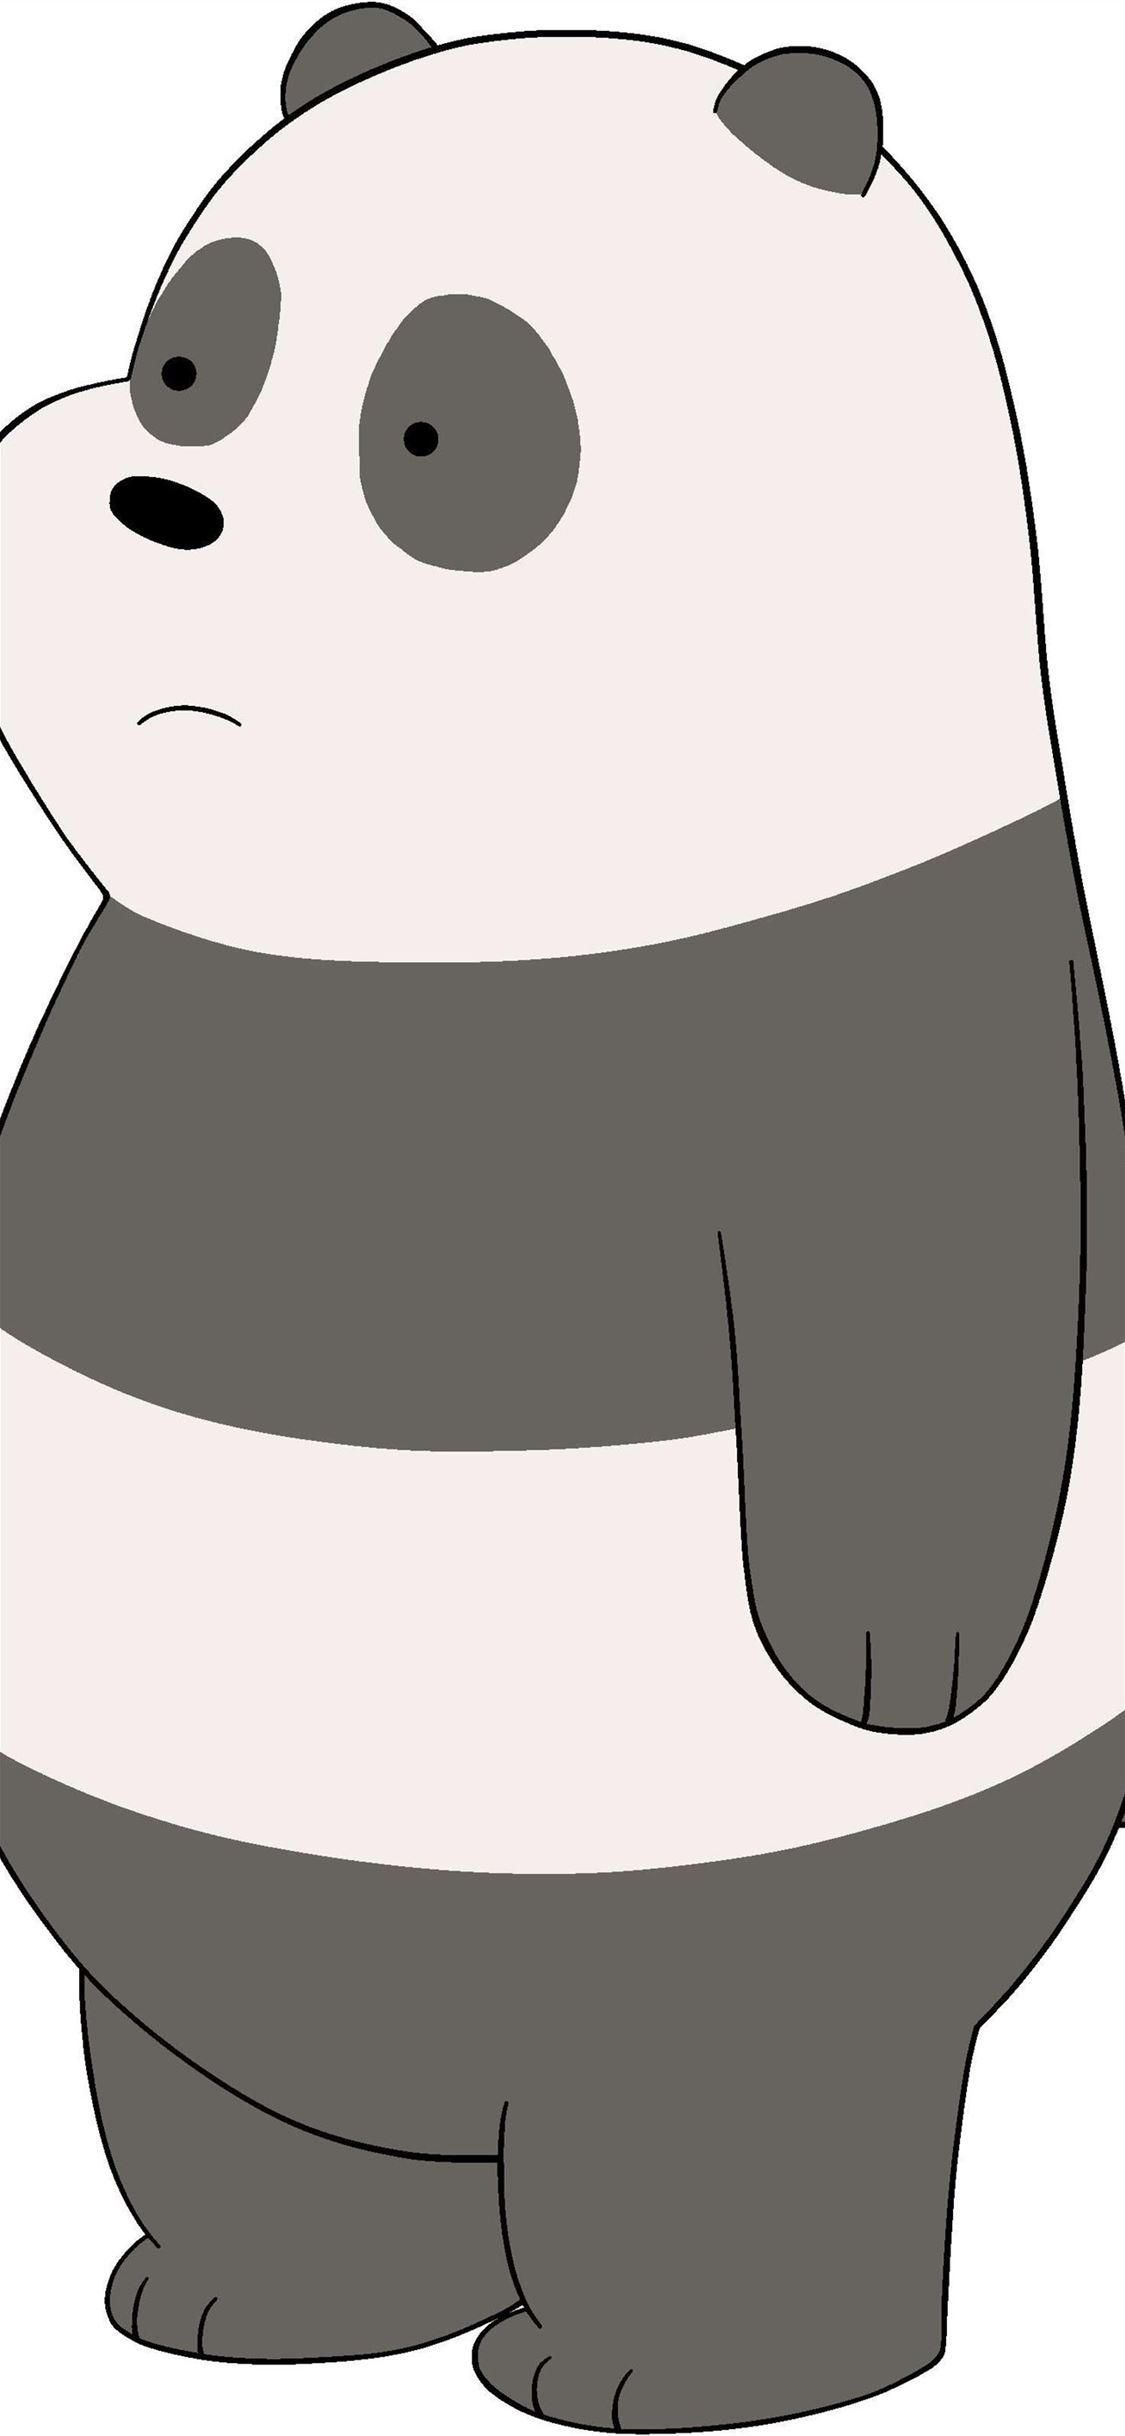 Get 40 Pc Cute We Bare Bears Hd iPhone Wallpapers Free Download